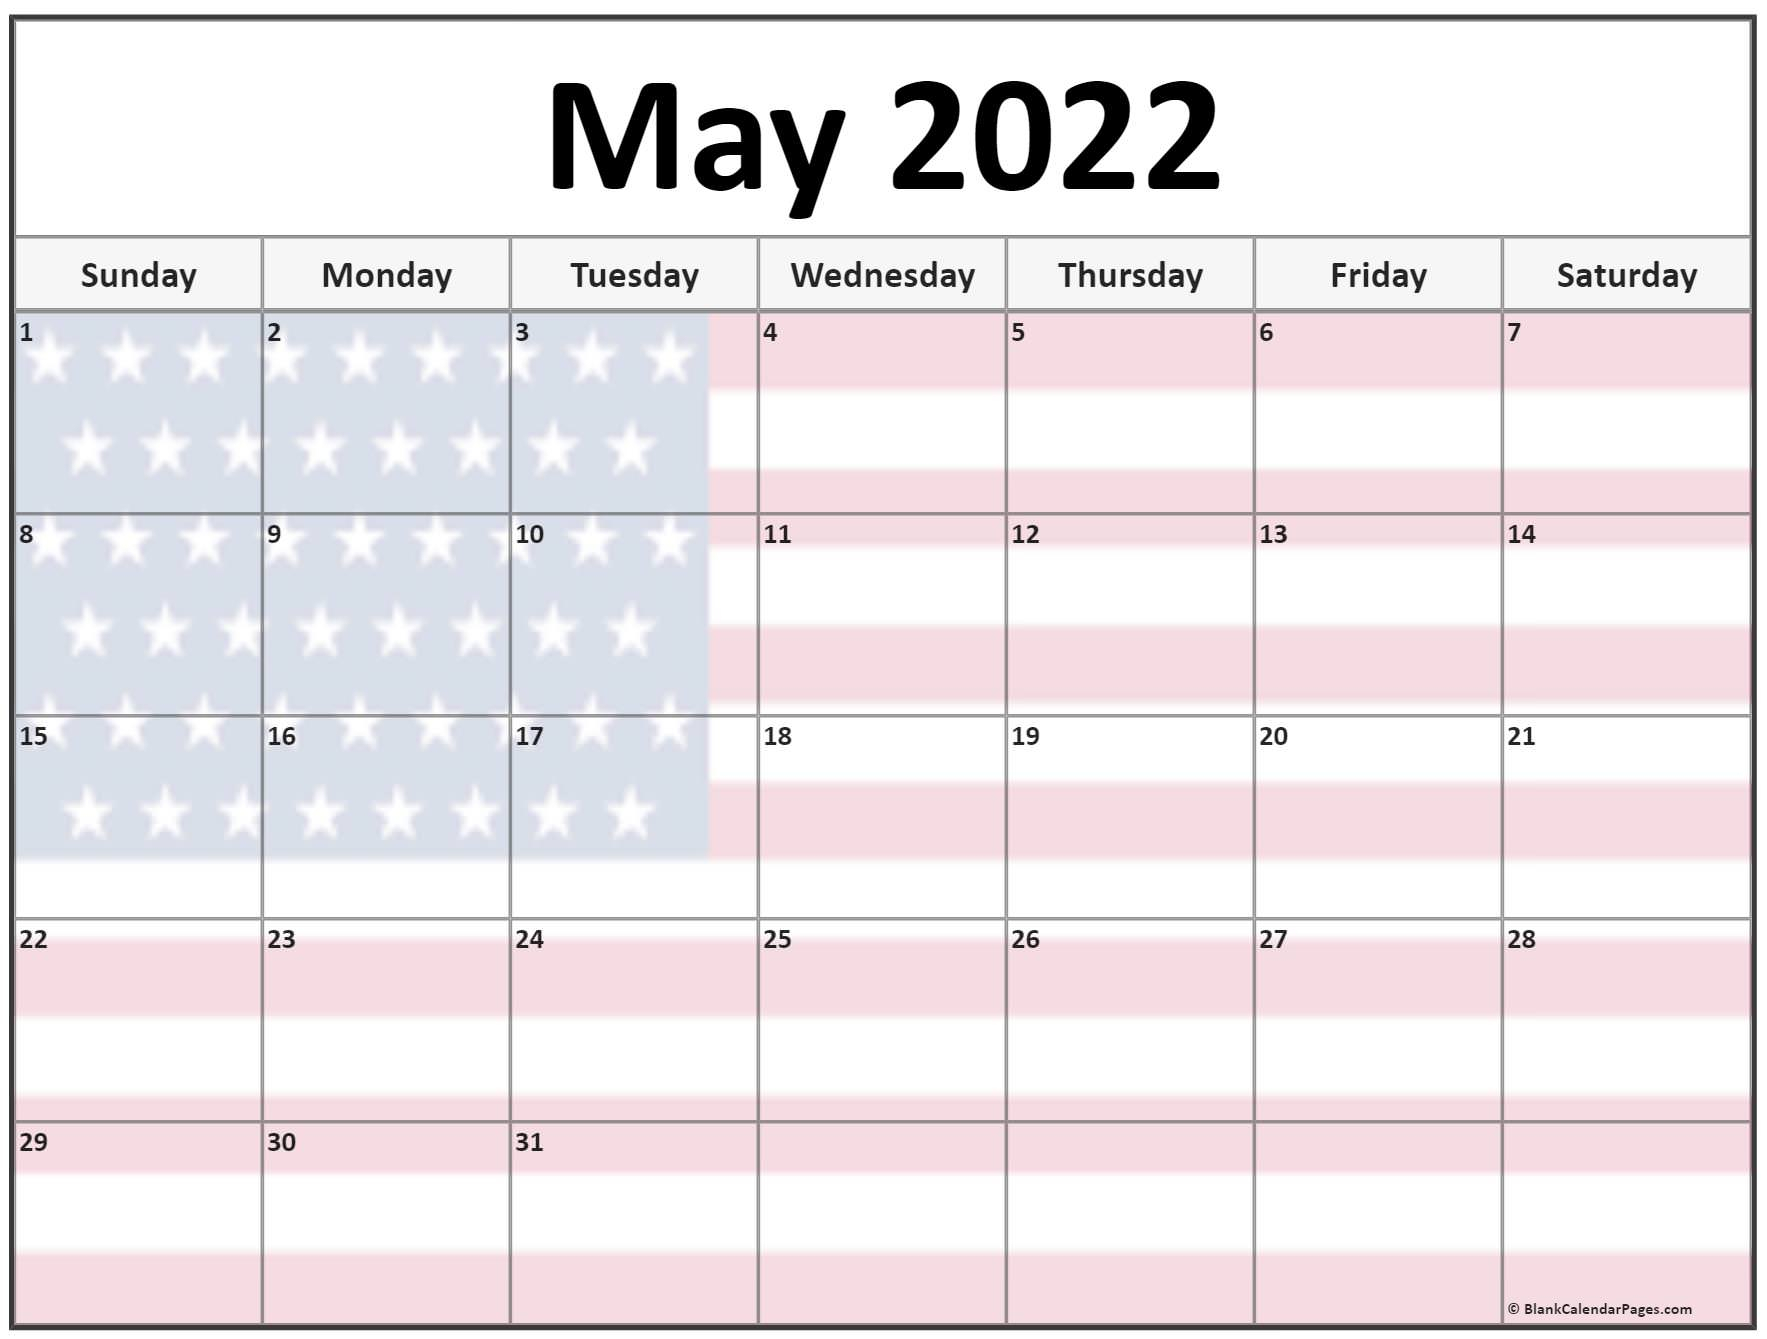 Collection Of May 2022 Photo Calendars With Image Filters